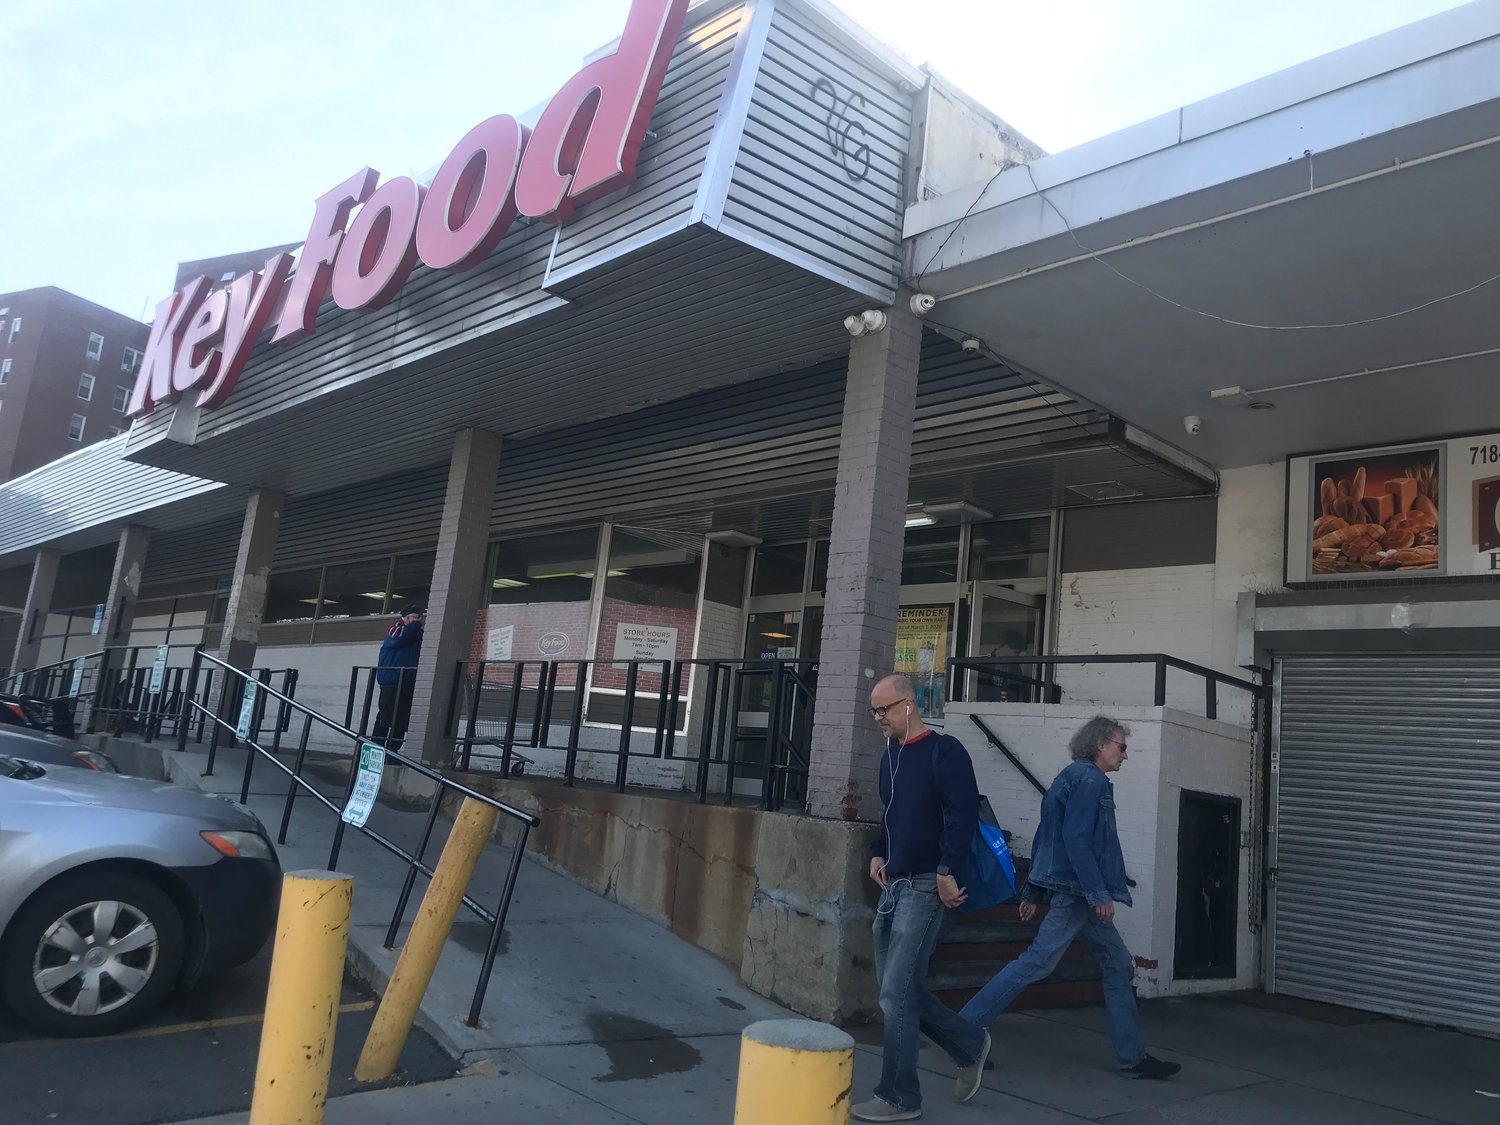 Rumors are circulating again that Key Food in North Riverdale is closing, this time in the middle of a coronavirus pandemic. Councilman Andrew Cohen and Assemblyman Jeffrey Dinowitz are trying to prevent that, at least until society normalizes again.